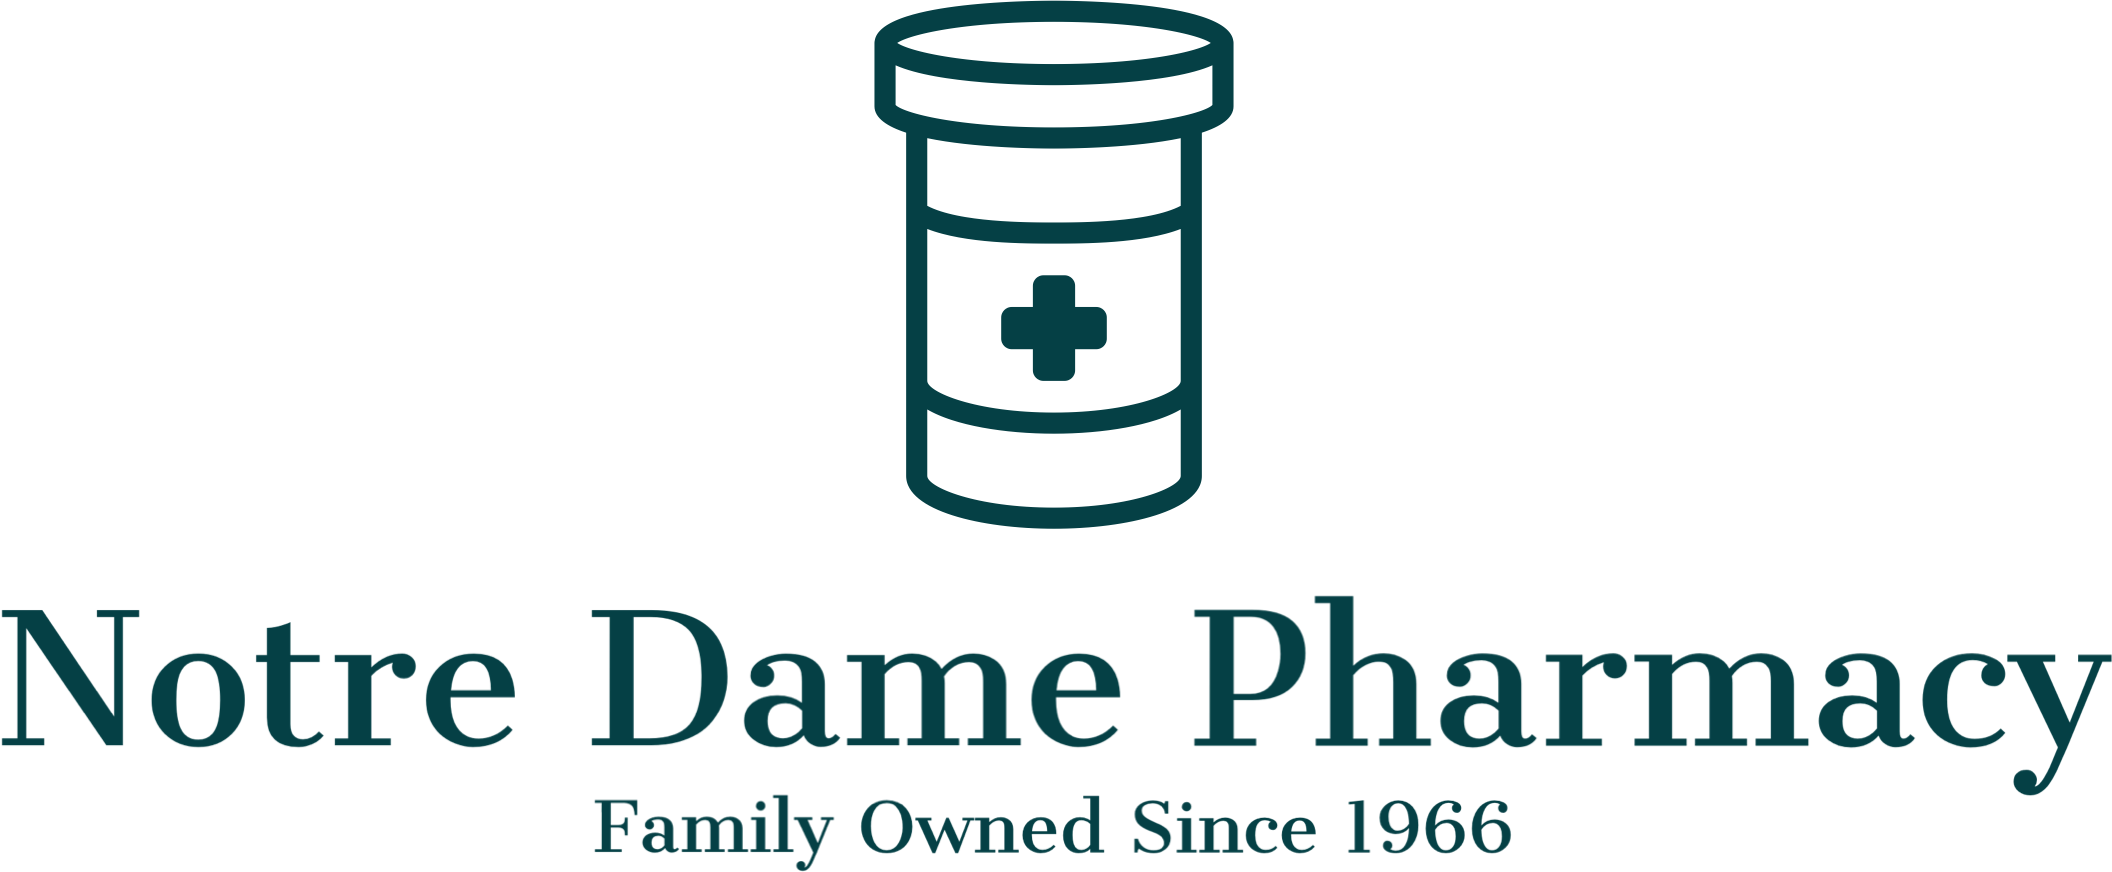 Redesign - Notre Dame Pharmacy